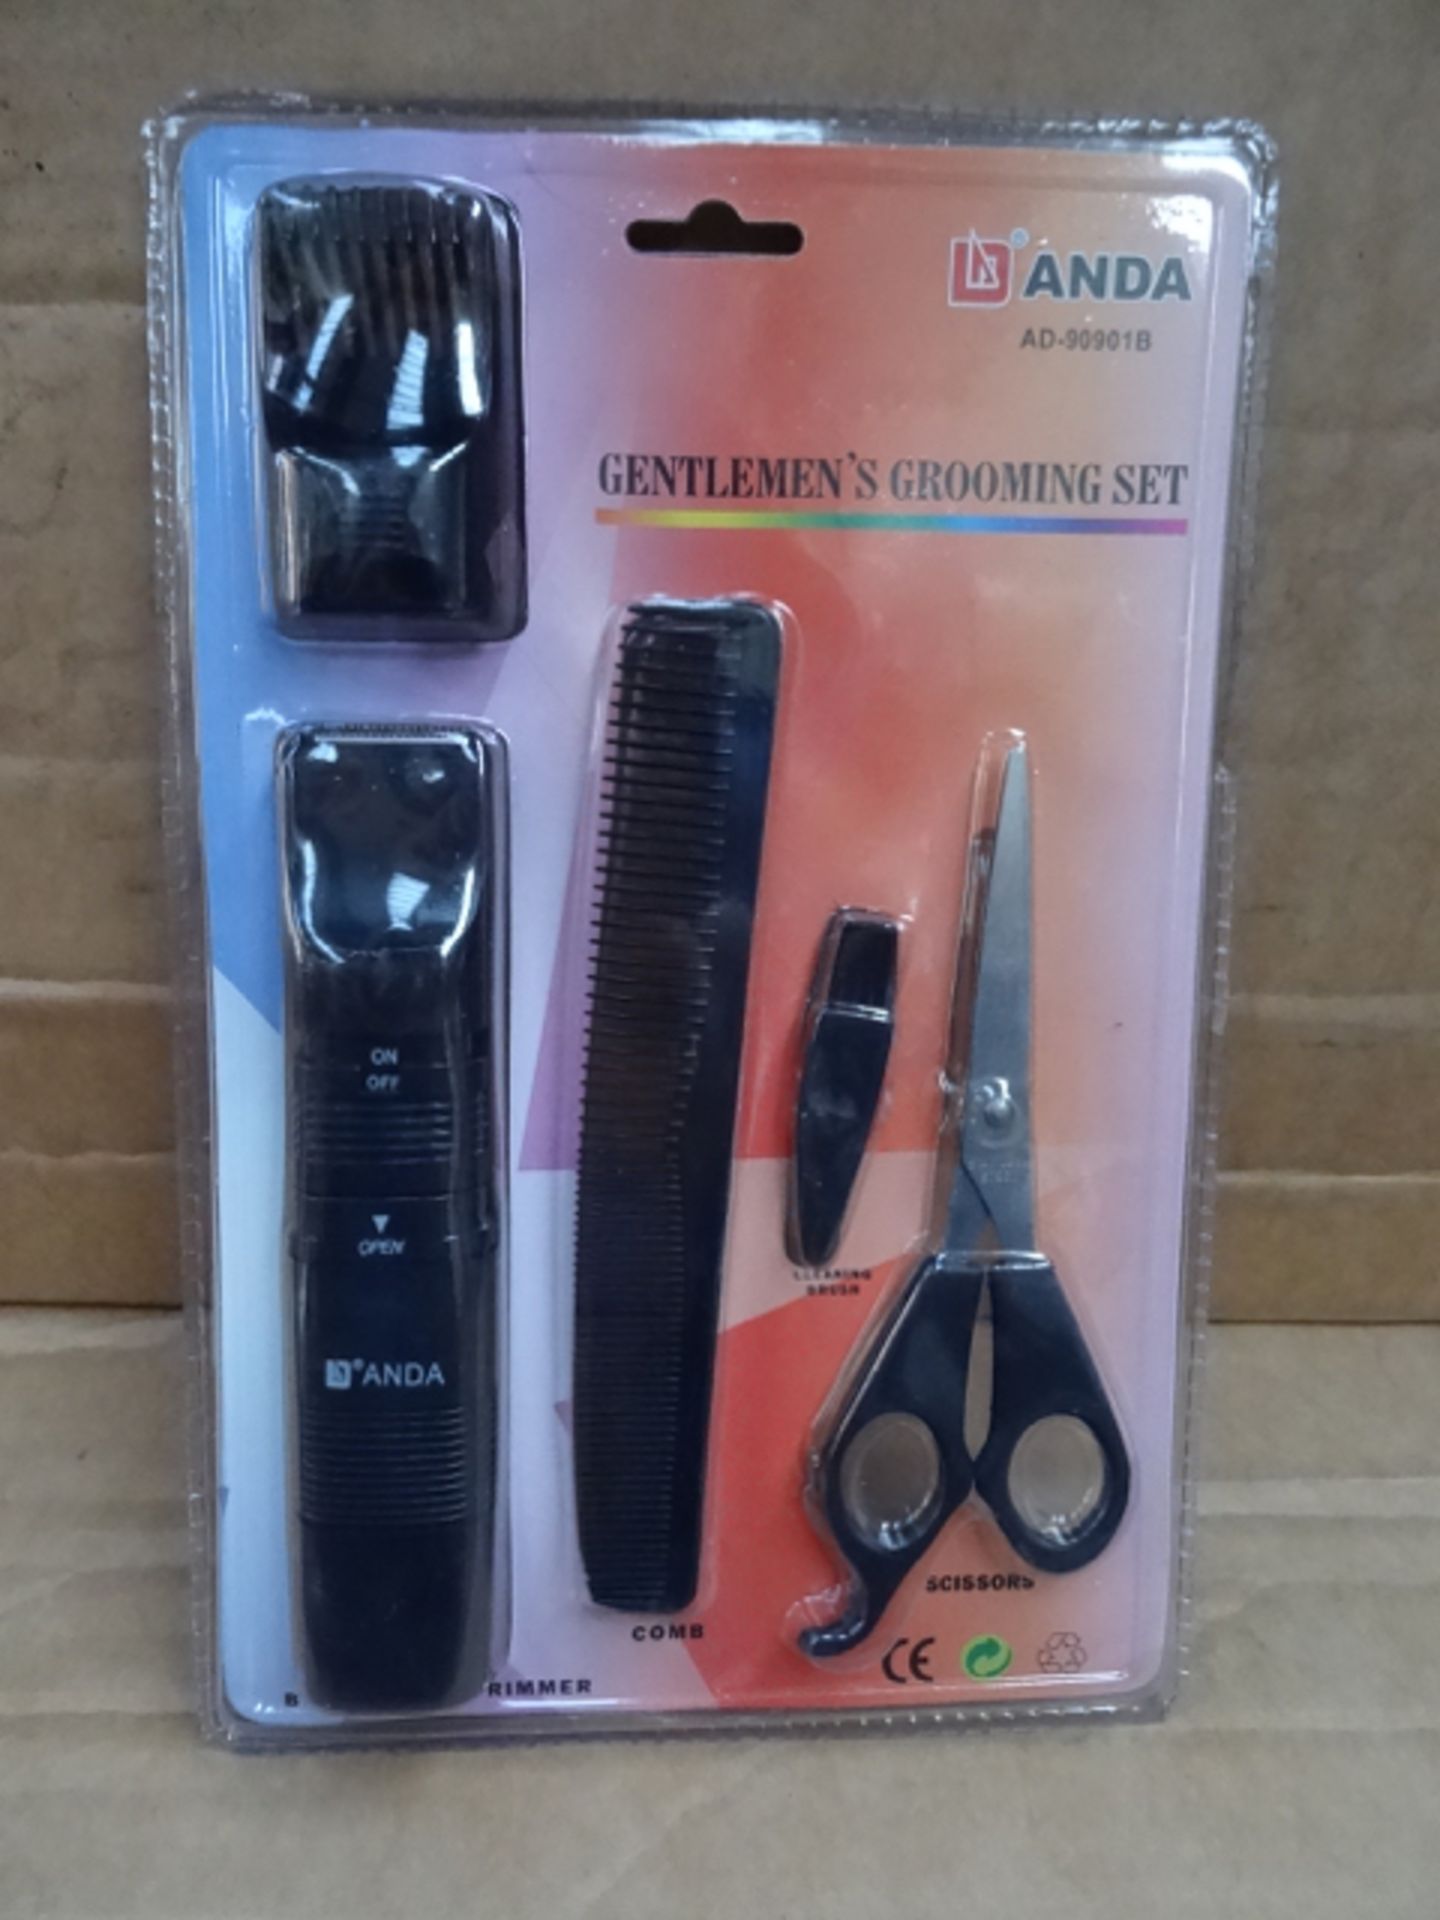 24 x Anda GENTLEMENS GROOMING SET (AD-90901B) INCLUDES: BATTERY POWERED BEARD AND HAIR TRIMMER, - Image 2 of 2